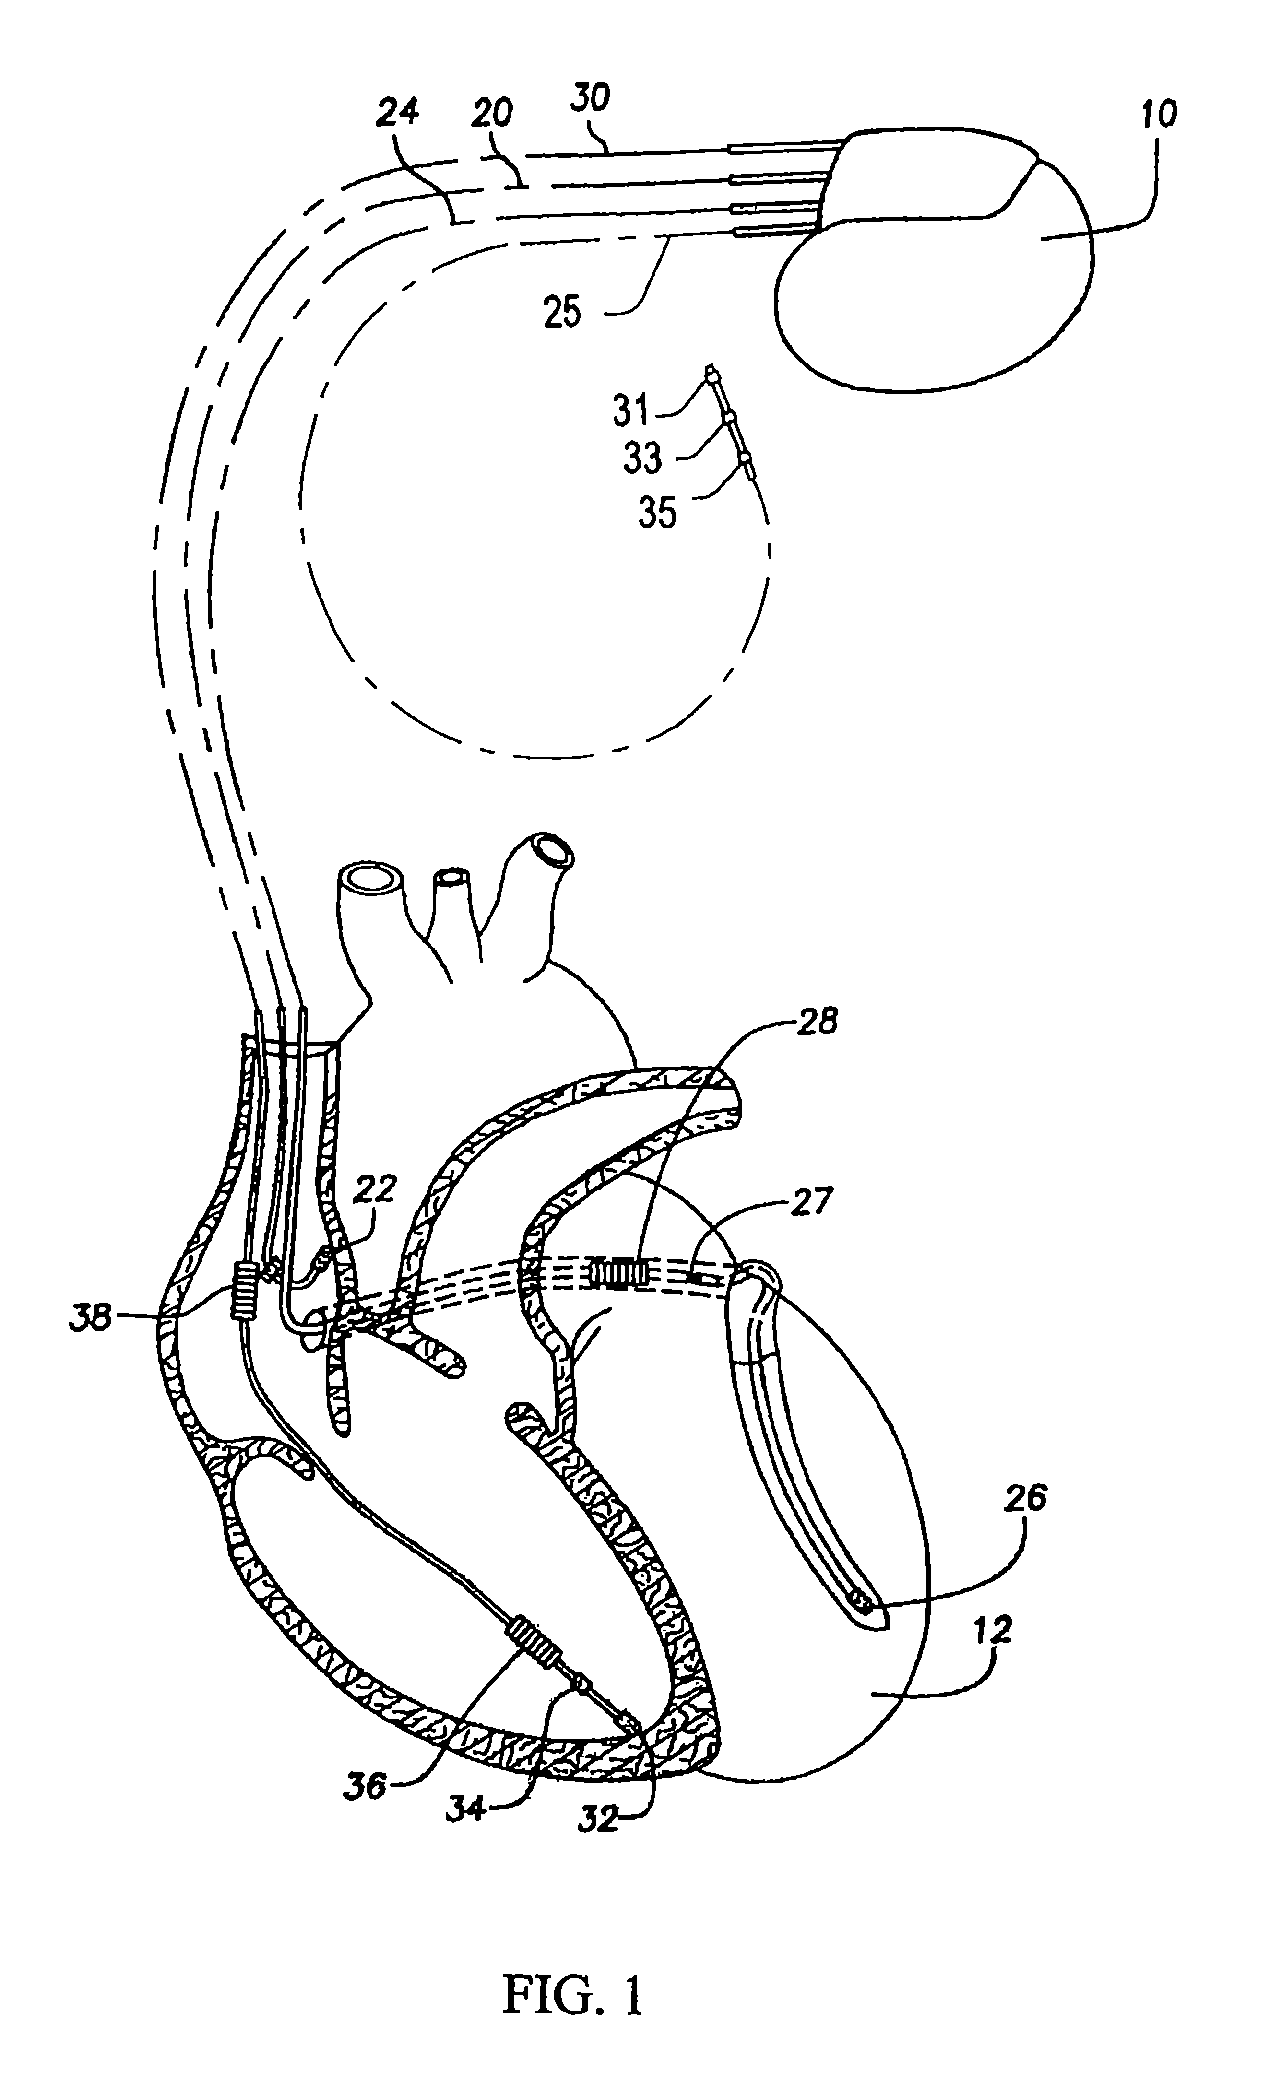 Implantable devices, and methods for use therewith, for monitoring sympathetic and parasympathetic influences on the heart